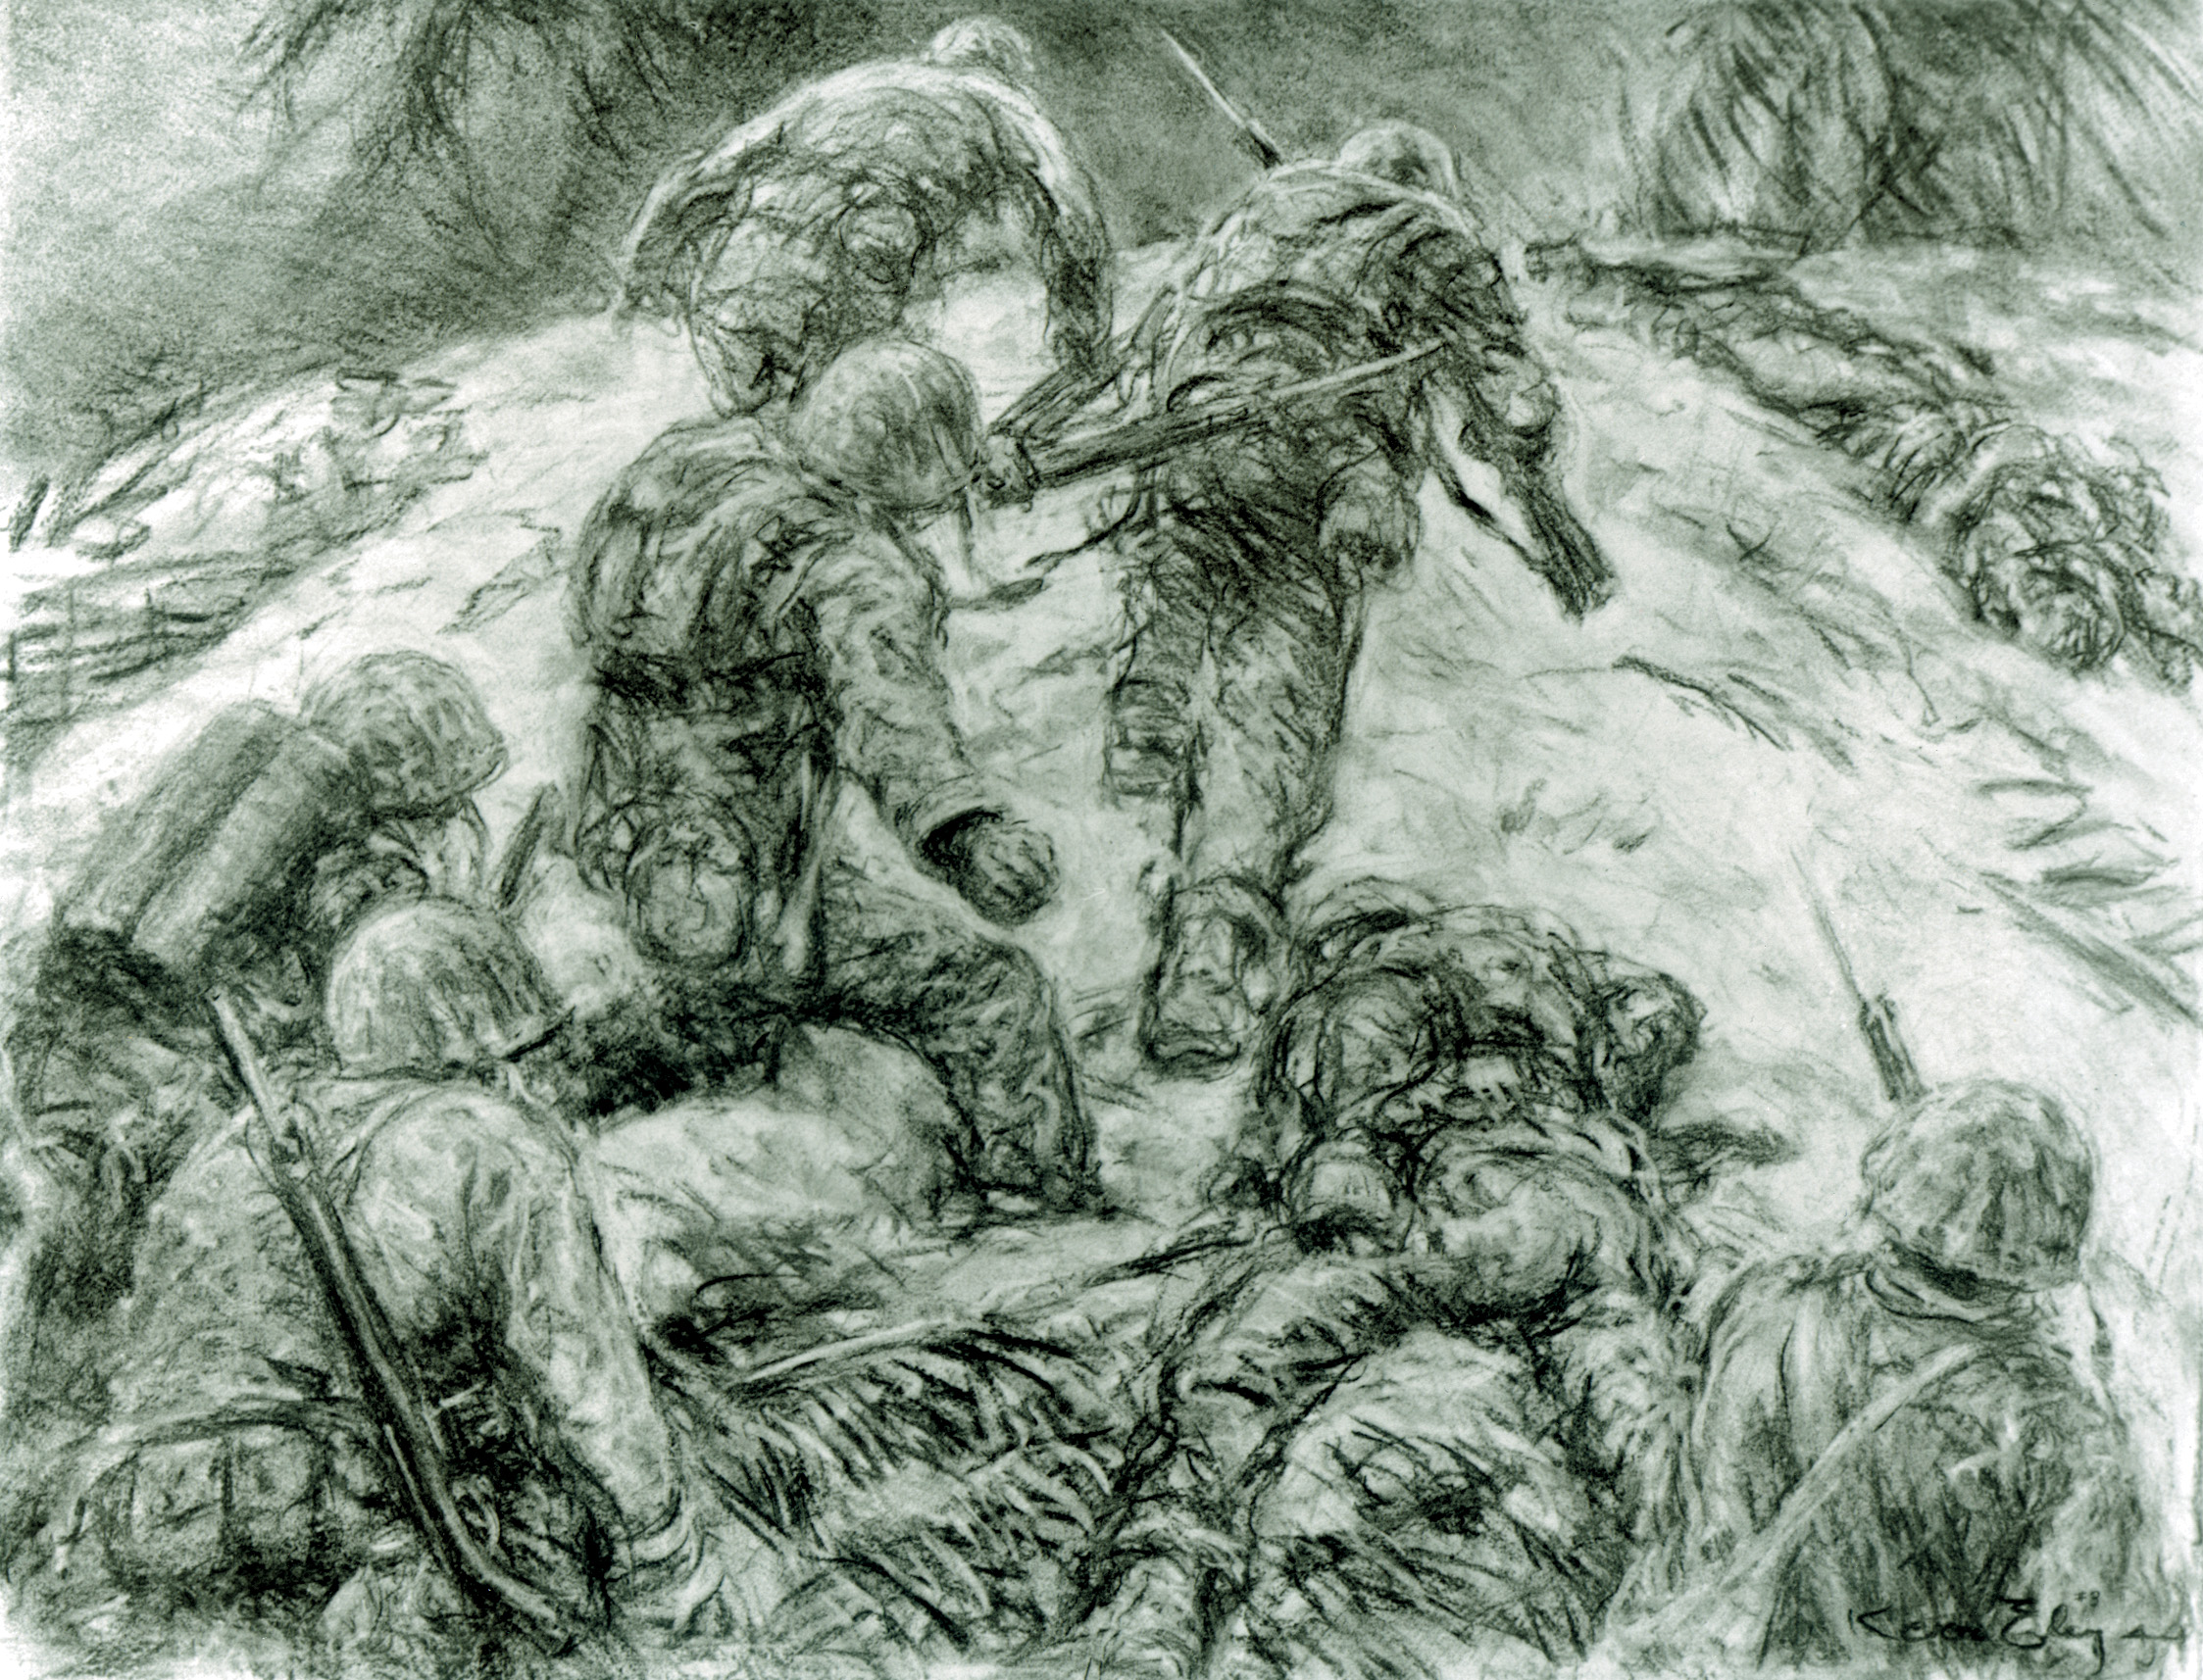 In “Marines Fall Forward” by Kerr Eby, Leathernecks storm a Japanese pillbox during the bitter 76 hours of fighting on the islet of Betio. The capture of Tarawa provided valuable lessons for future amphibious landings in the Pacific.